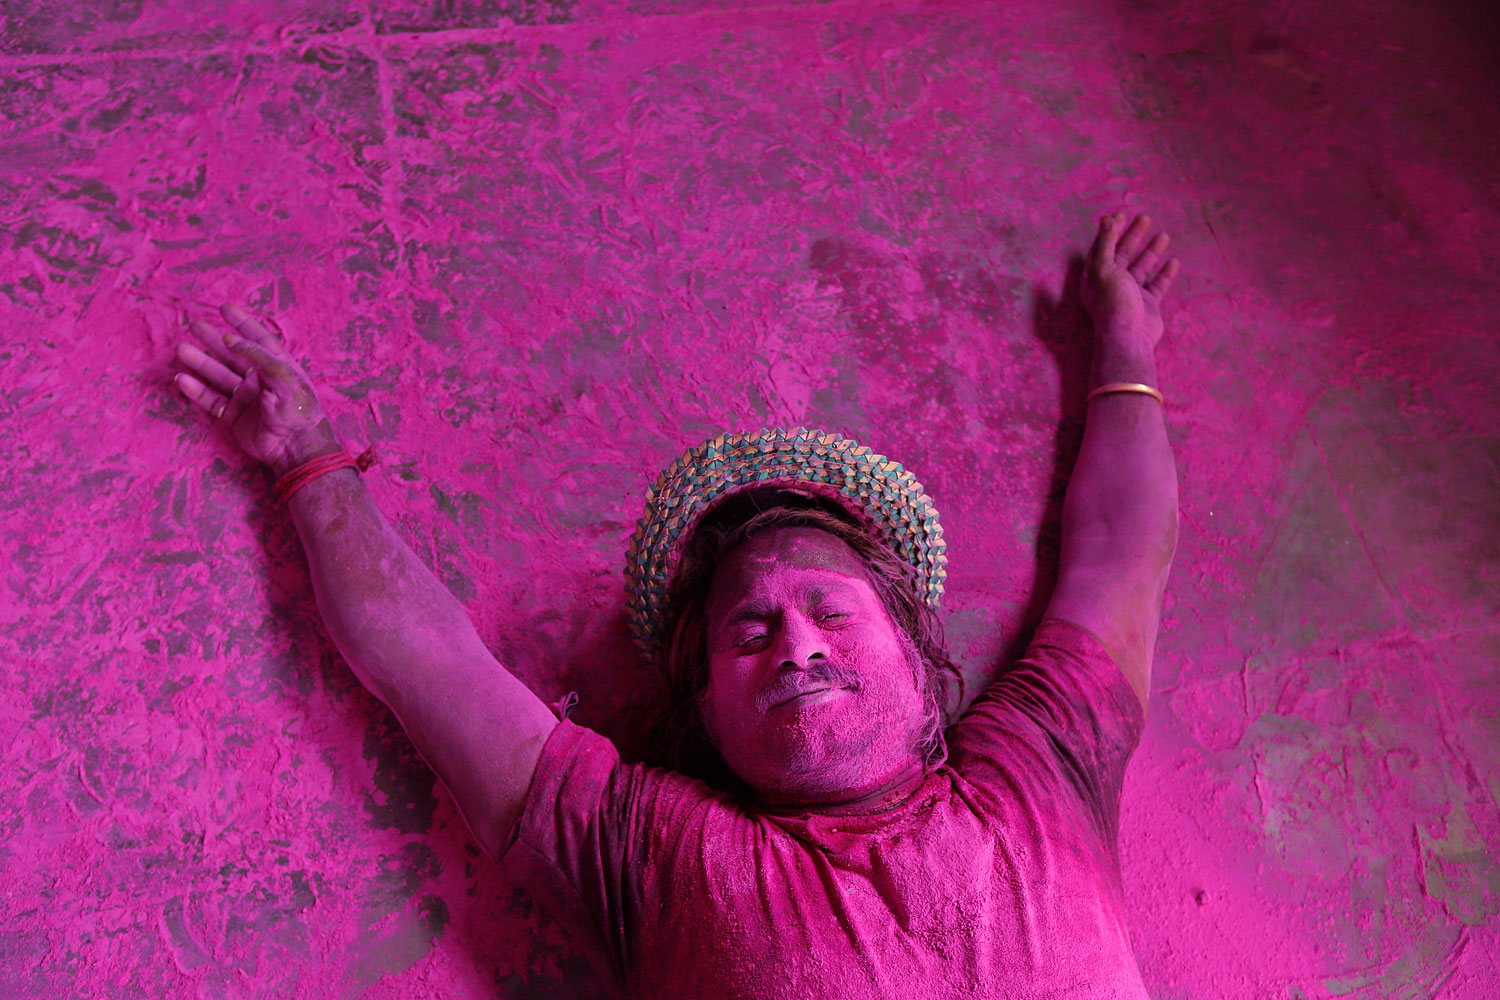 A man lies on the ground smeared with colored powder during celebrations marking Holi, the Hindu festival of colors, in Allahabad, India, March 17, 2014.